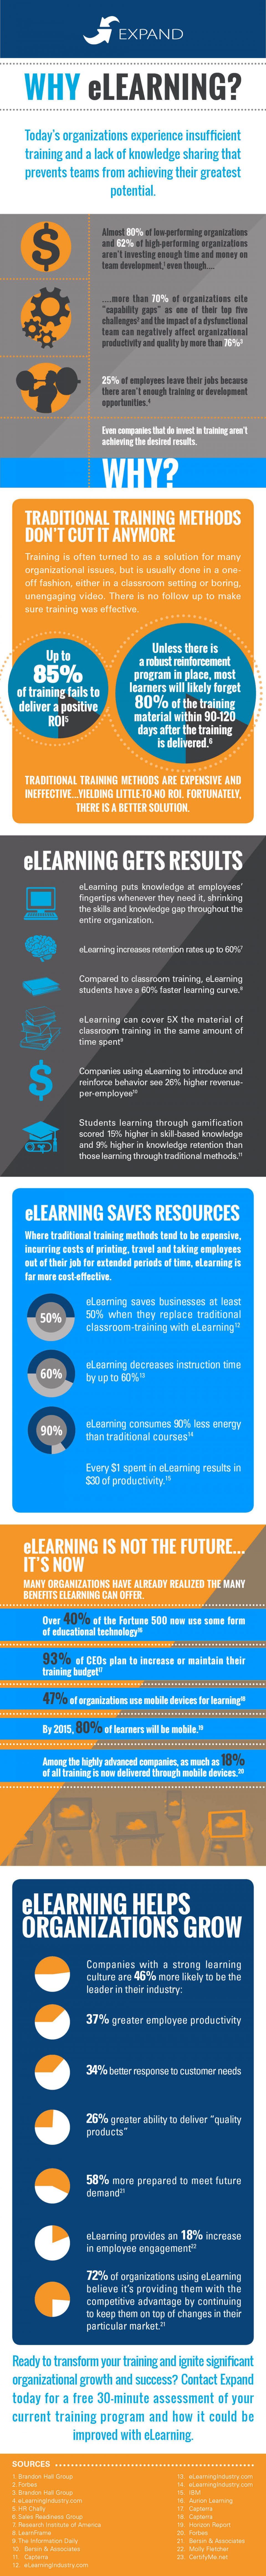 Why eLearning Is The Most Effective Method Of Training Employees Infographic